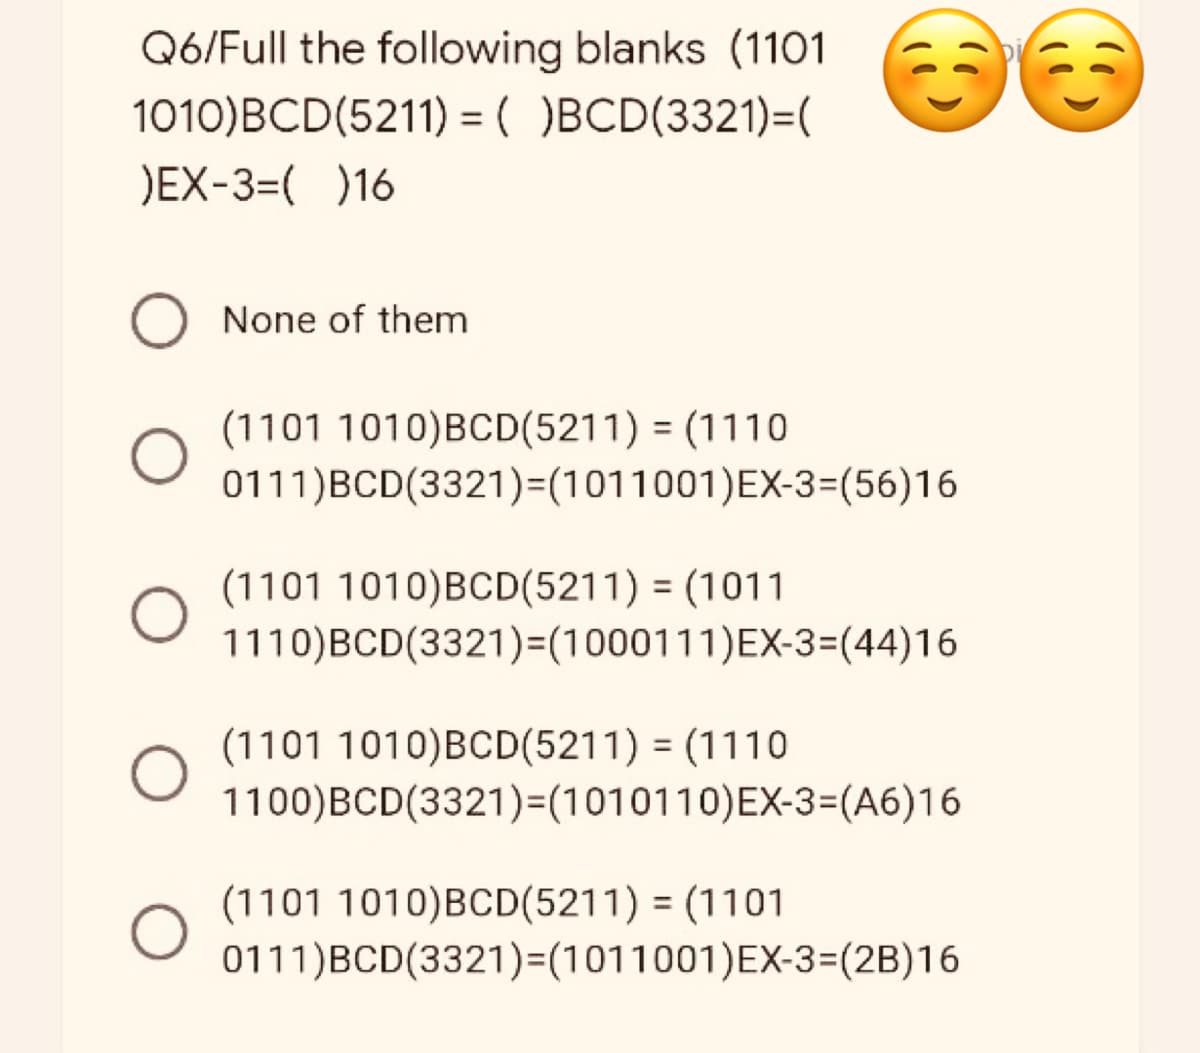 Q6/Full the following blanks (1101 36
1010)BCD(5211) = ( )BCD(3321)=(
)EX-3=( )16
None of them
(1101 1010)BCD(5211) = (1110
0111) BCD(3321)=(1011001) EX-3=(56)16
(1101 1010)BCD(5211) = (1011
1110) BCD(3321)=(1000111)EX-3=(44)16
(1101 1010)BCD(5211) = (1110
1100)BCD(3321)=(1010110) EX-3=(A6)16
(1101 1010)BCD(5211) = (1101
0111)BCD(3321)=(1011001)EX-3=(2B)16